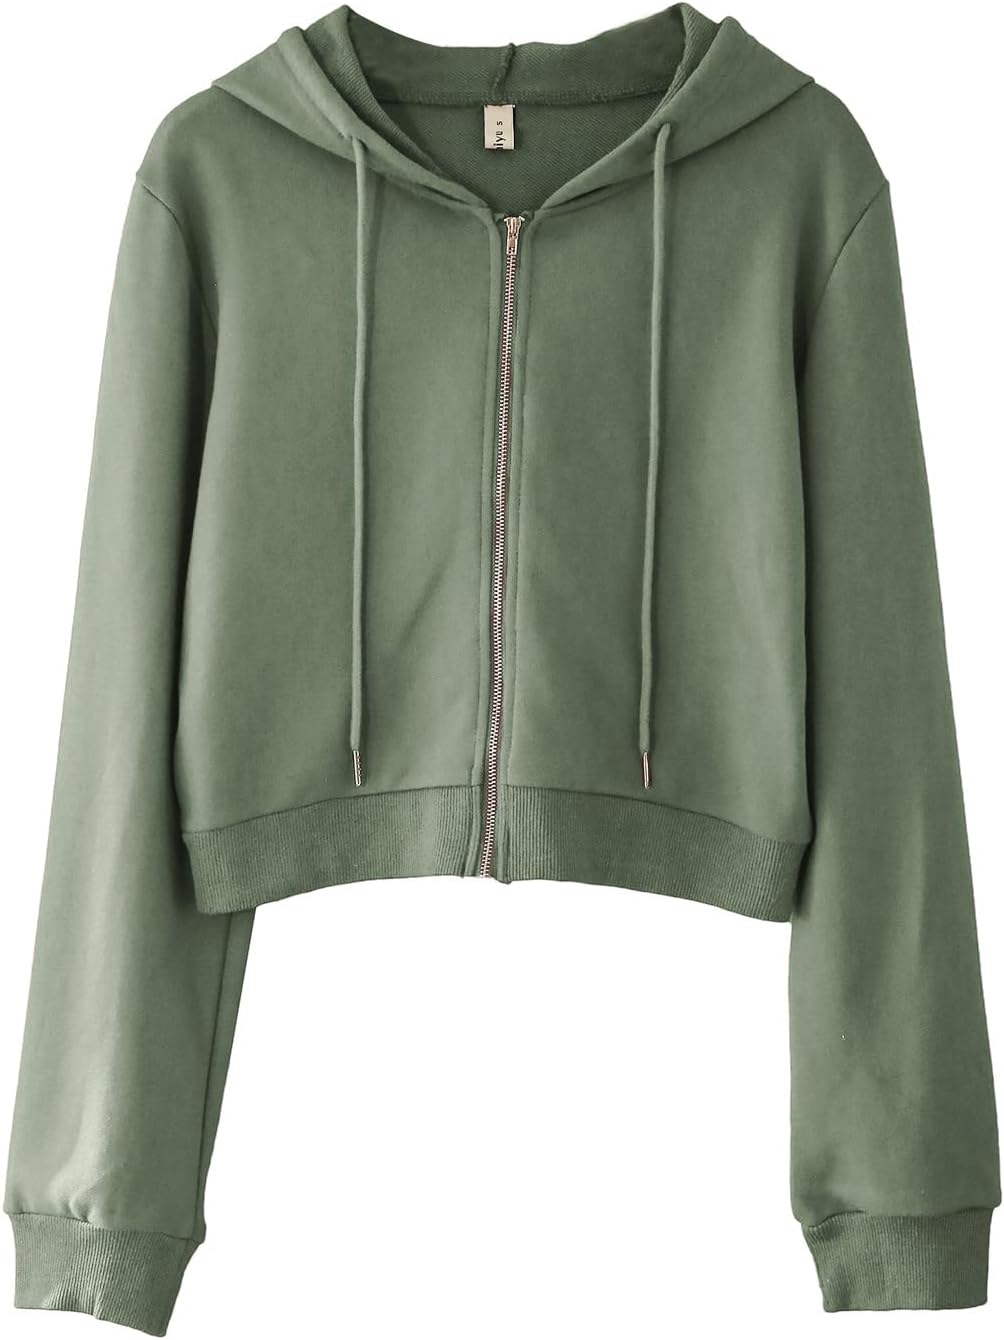 NTG Fad Dusty Green / Small Women's Cropped Zip up Hoodie with Drawstring Hooded